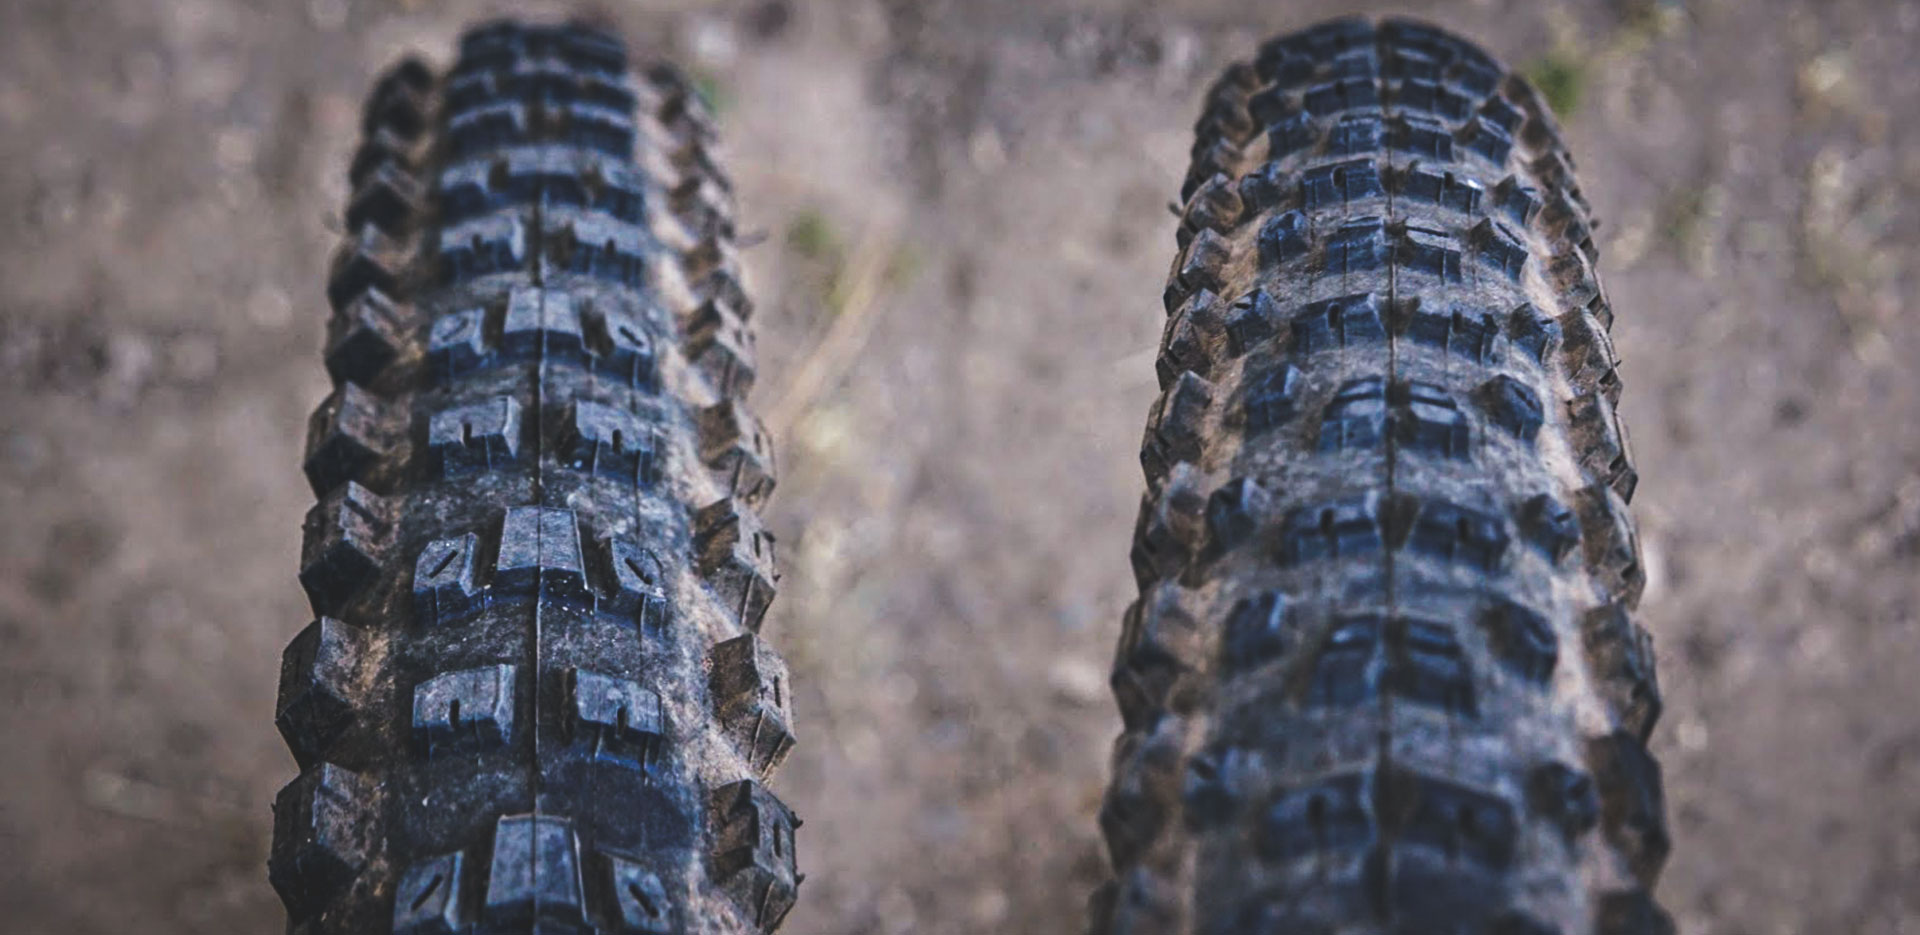 Maxxis Dissector / Maxxis Rekon Tire Review